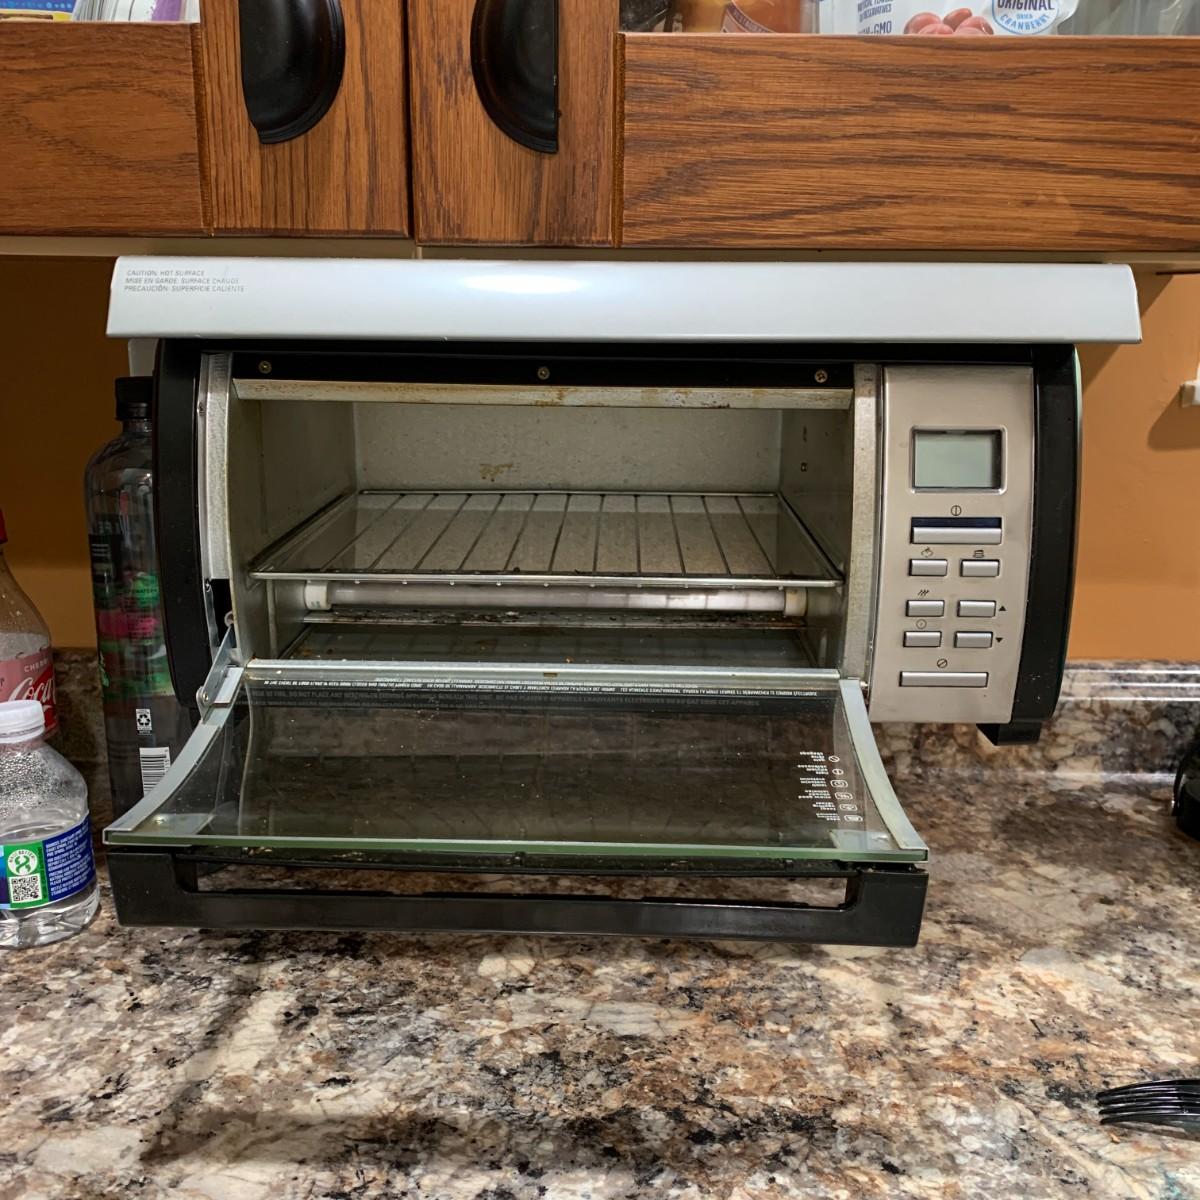 Black + Decker Under-the-Cabinet Mounted Toaster Oven